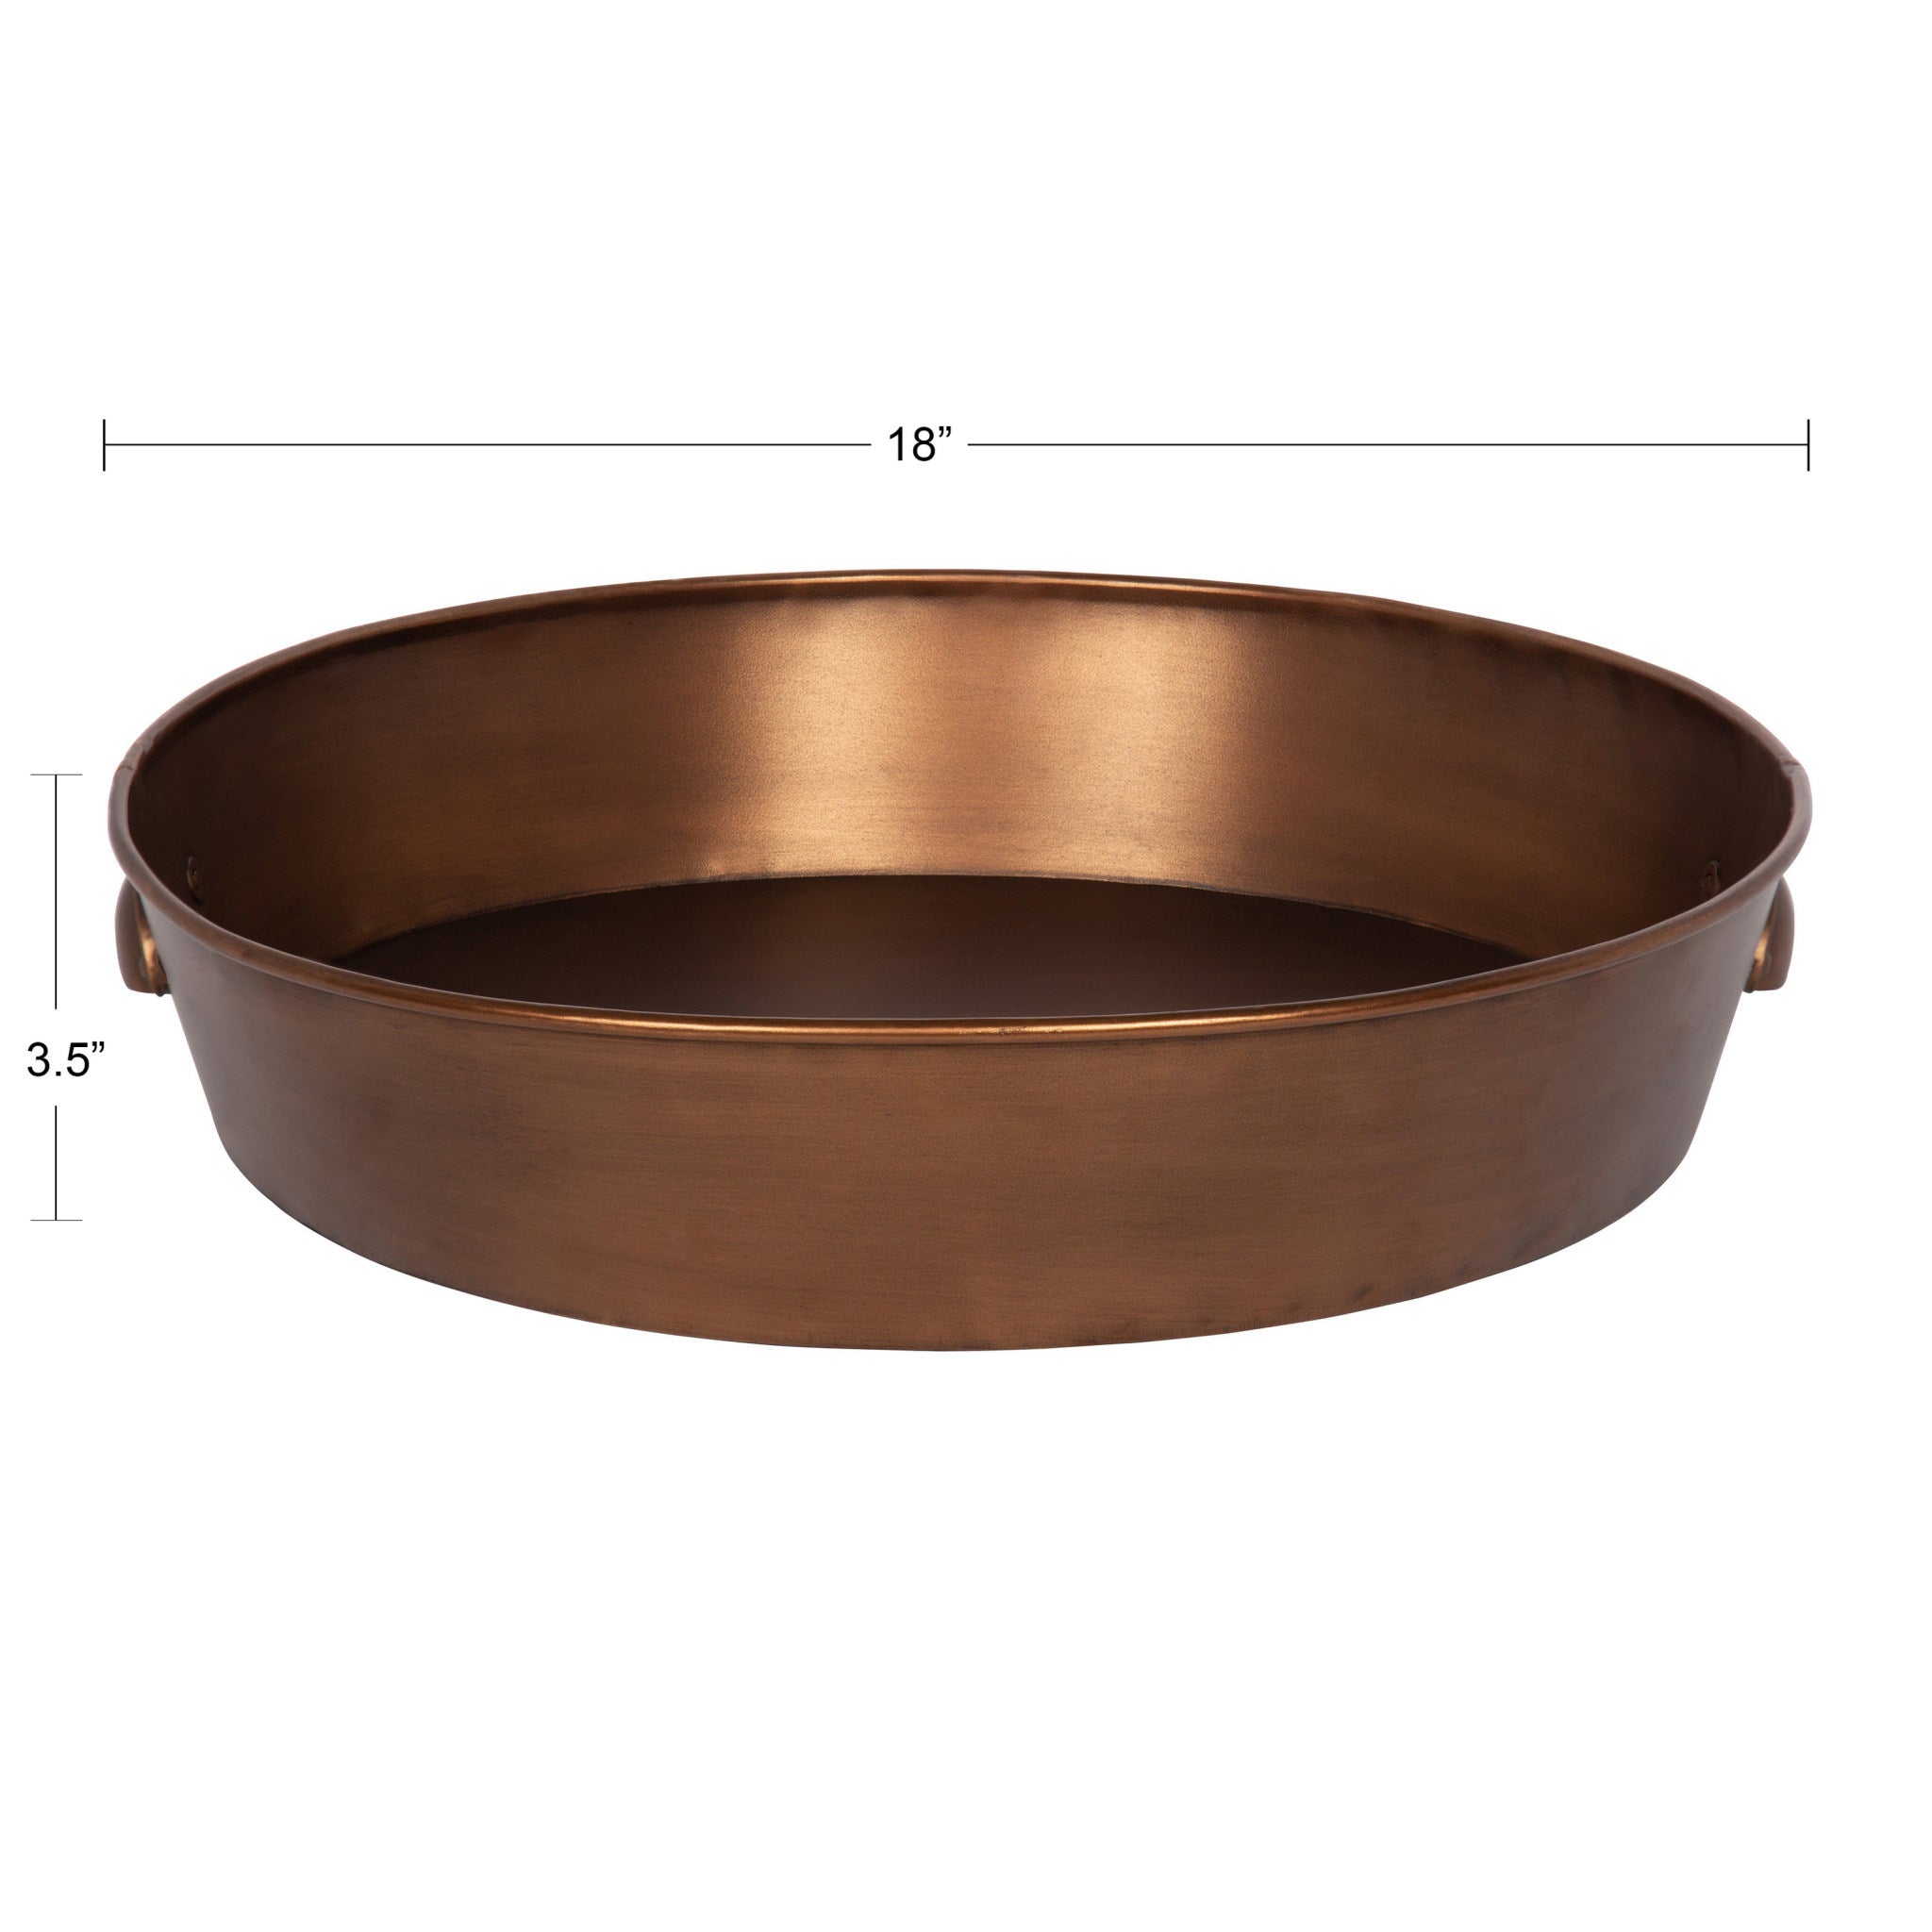 Forgeham Round Metal Tray with Handles